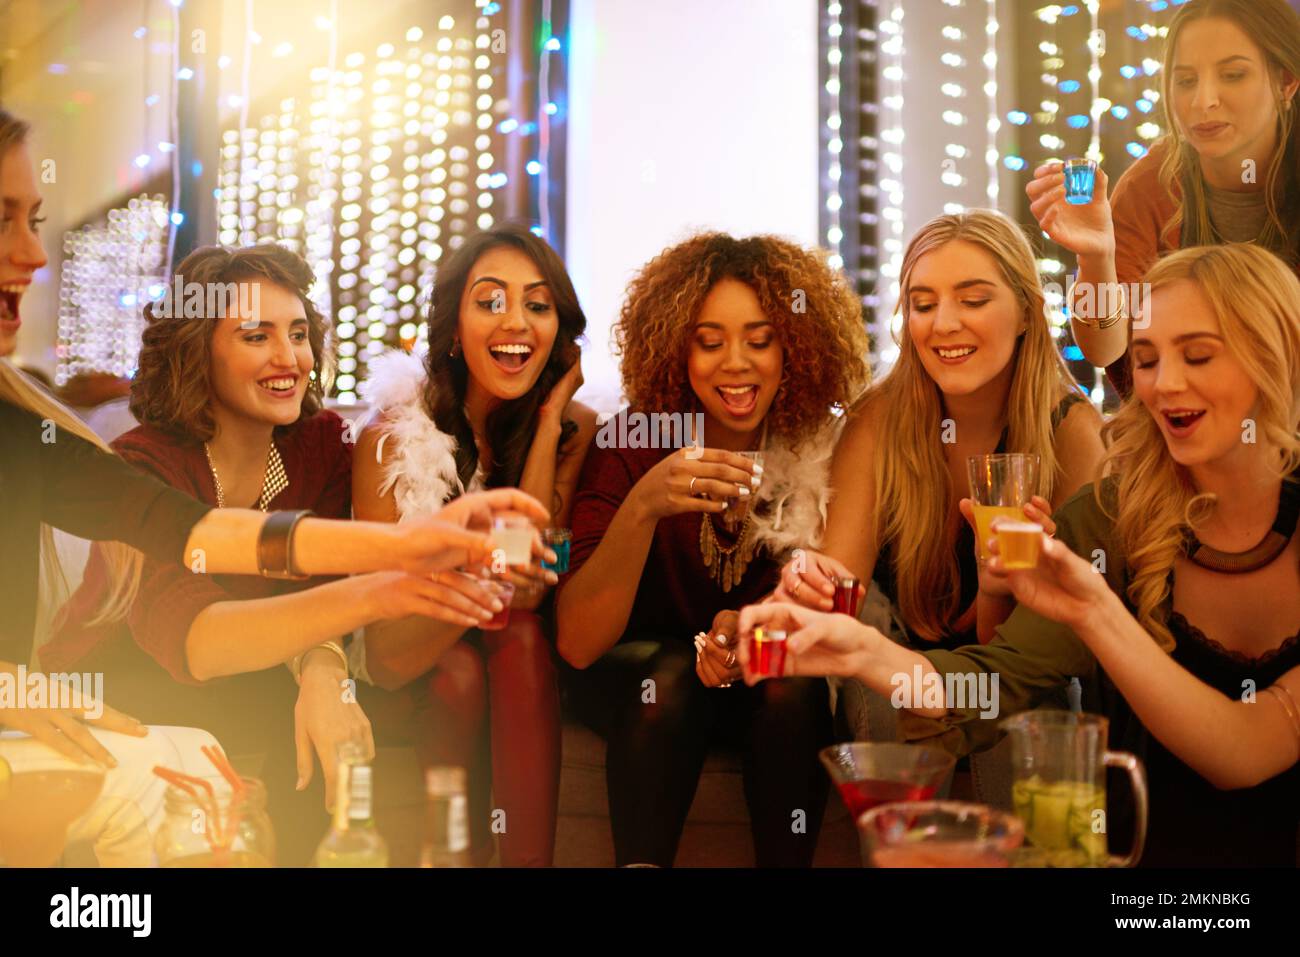 They know how to throw an awesome party. a group of young women drinking shots at a party. Stock Photo